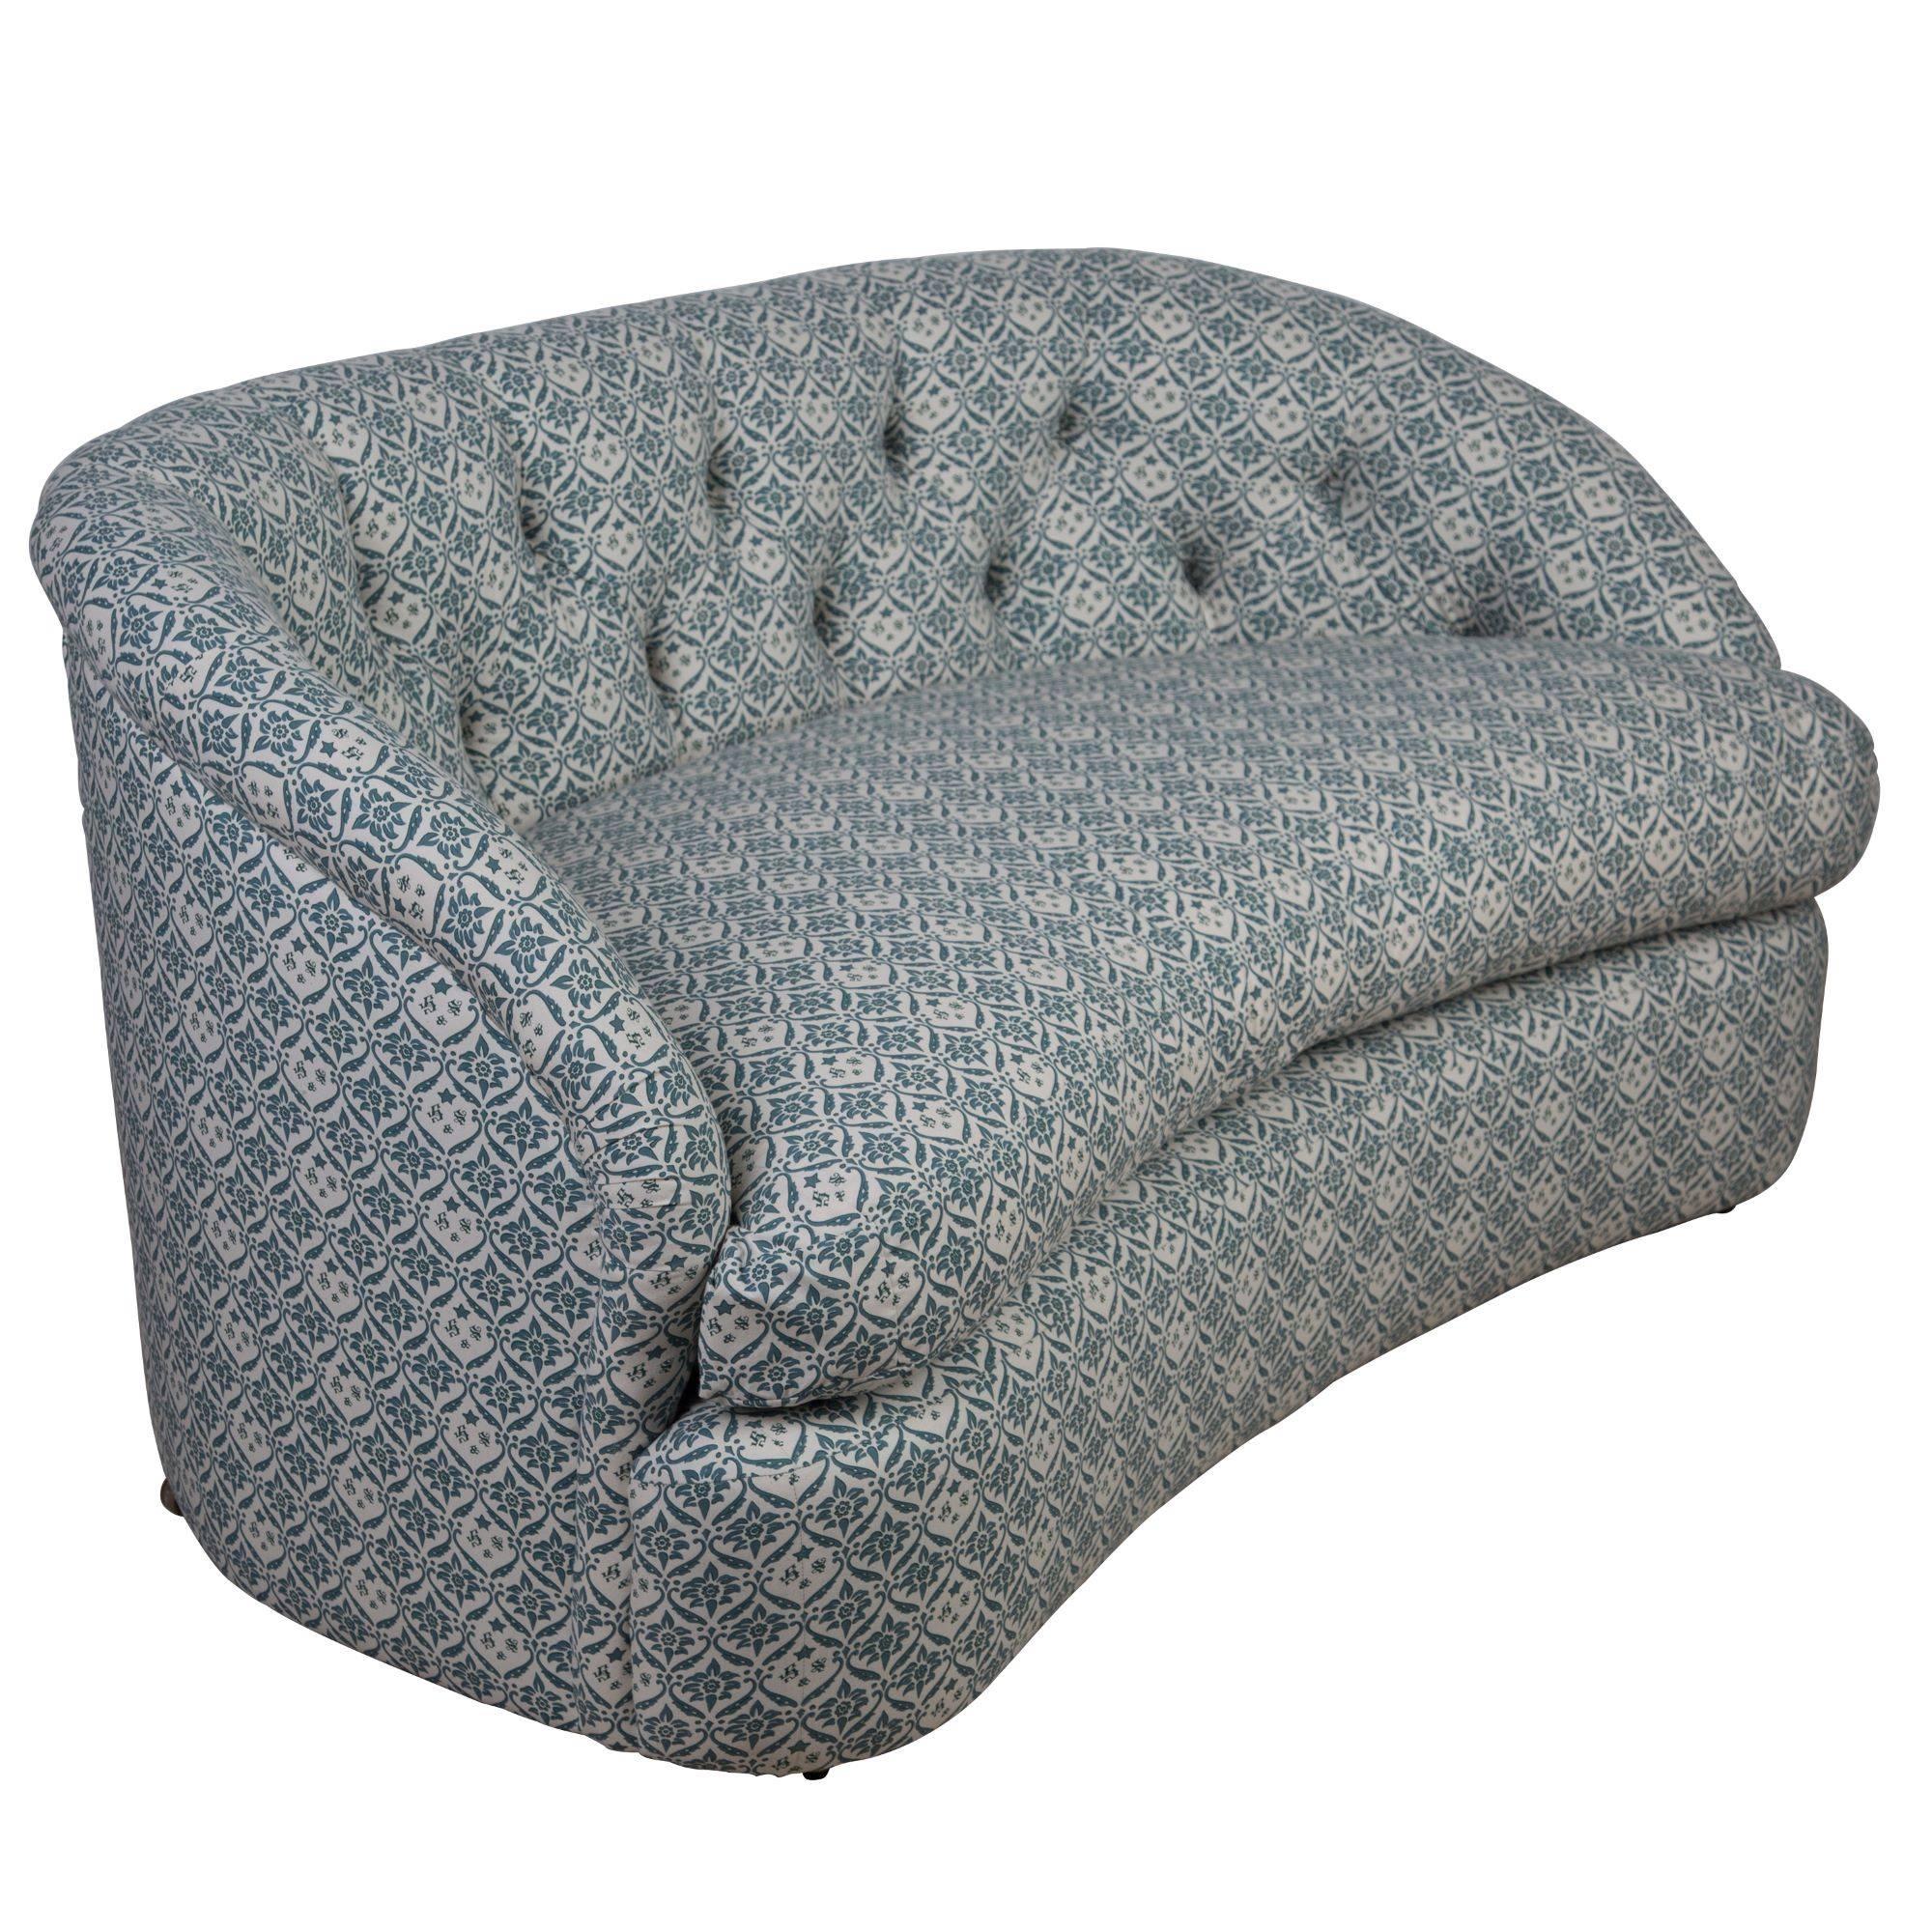 A 1930s Howard and Sons loveseat, fully reupholstered and recovered in a copy of the original Howard & Sons ticking. Measure: Seat height 45cm. Seat depth 60cm.